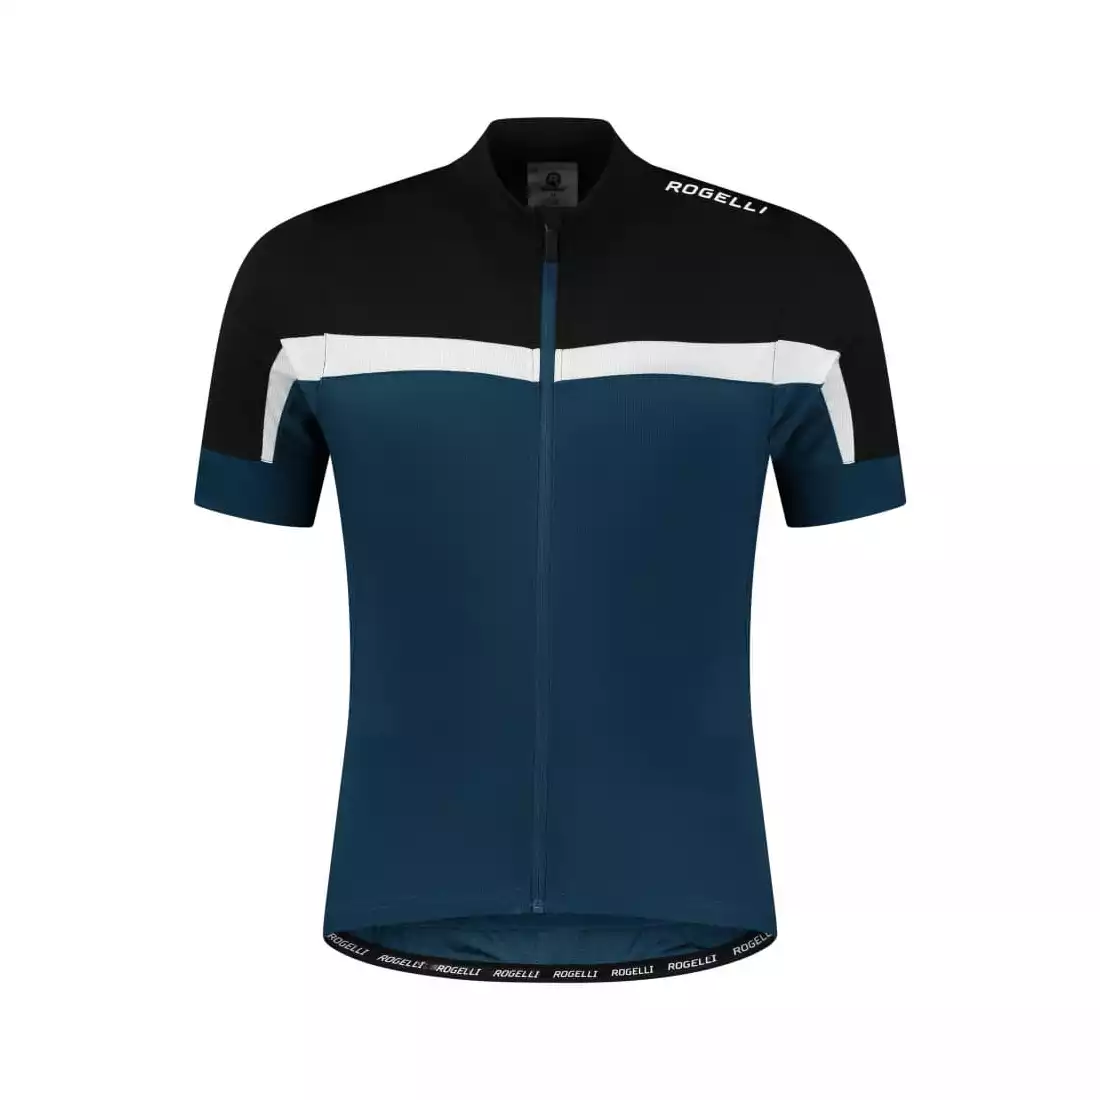 Rogelli COURSE men's cycling jersey, black and navy blue